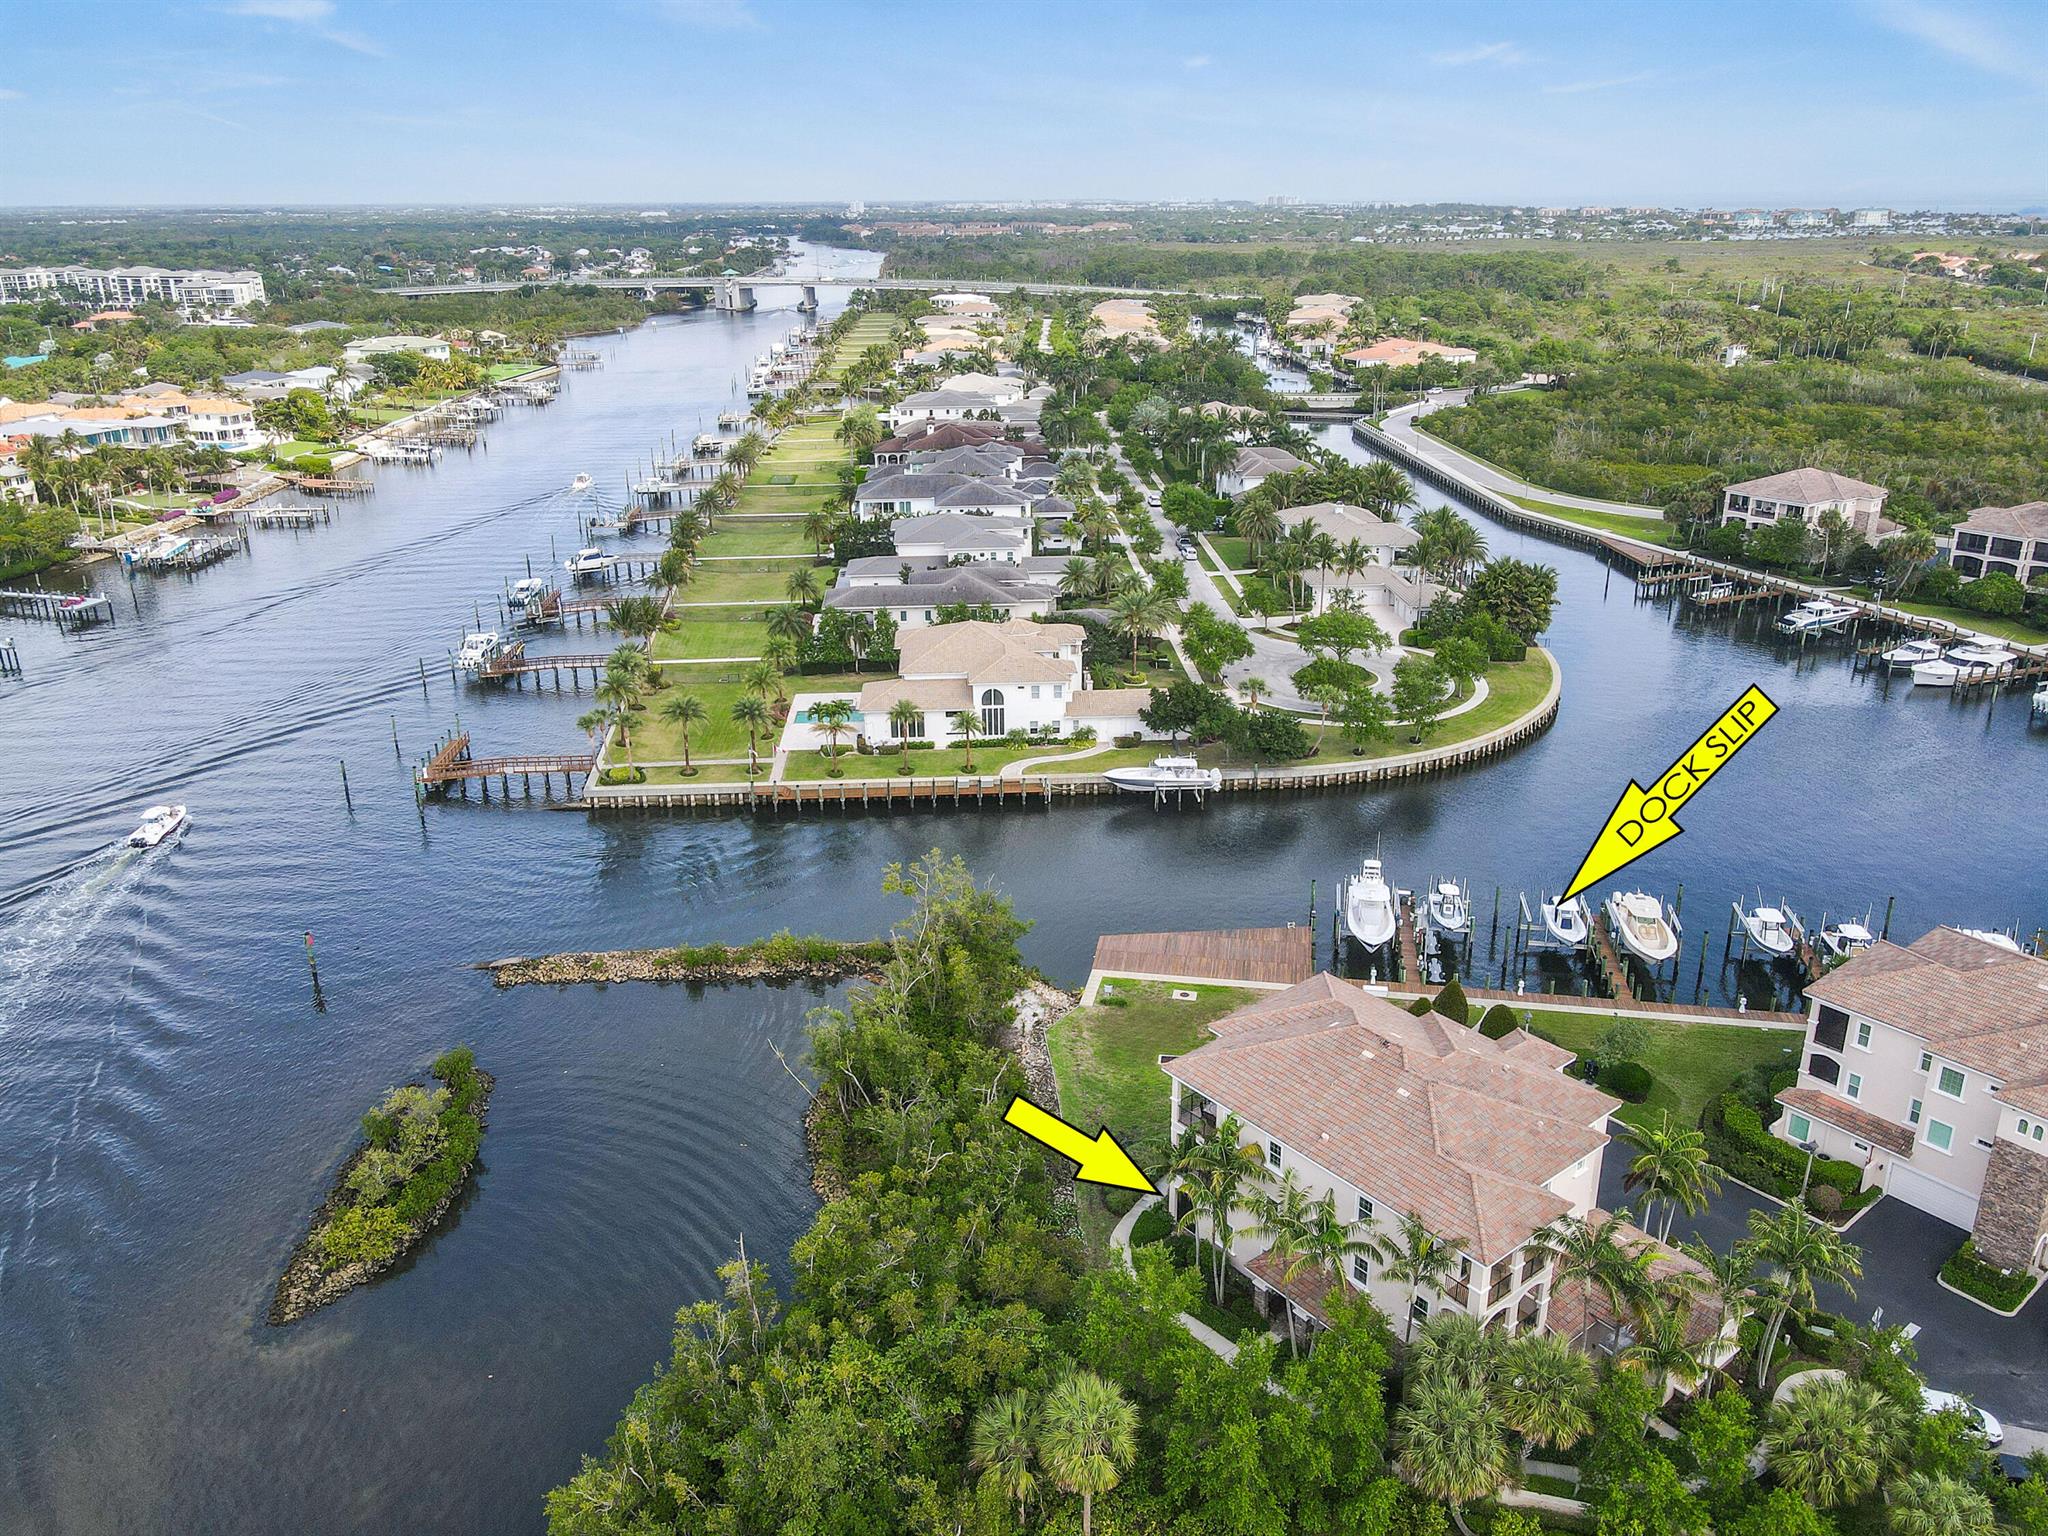 A Boater's Paradise, First Floor Carriage Home with a Private Boat Slip and Direct Intracoastal Access, nestled in the exclusive enclave of Frenchman's Harbor! Welcome to 13435 Treasure Cove Circle, where luxury living meets unparalleled maritime bliss in North Palm Beach.This ground-floor residence is located in one of the newer Carriage Home buildings, closest to the Intracoastal, and overlooking an expansive yard space with direct water views. It lives like a home with a walk out lifestyle, boasting a side entry front door, a front patio, a private back patio overlooking the water, a 2-car garage and a private driveway. Included is an exclusive-use dock slip that can accommodate up to a 60-foot vessel and houses a 20,000-pound lift, tailored perfectly for the discerning boater. The location is ideally situated for boating with a wide canal, deep water, no fixed bridges, and quick ocean access. 
Situated at the end of the cul-de-sac and oriented toward the water and lushly landscaped spaces, this carriage home has the most private views in the community and feels tucked away, like a tropical oasis. Thoughtfully designed with 3 bedrooms, 2 bathrooms, spacious living areas and opulent finishes spanning over 2,000 square feet. 
The gourmet kitchen boasts marble countertops and is equipped with a KitchenAid 6-top gas range, Fisher &amp; Paykel dual-drawer dishwasher and a large walk-in pantry. 
An expansive primary suite faces the water views, has access to the back patio and boasts a spa-like bathroom with soaking tub, walk-in shower, dual vanities, and sleek, modern finishes. Two guest suites offer the same private views of greenery and share an additional full bathroom. More home features include hurricane impact windows and doors, engineered wood flooring, expanded built-out pantry, plantation shutters, epoxy flooring in garage and a water-filtration system. 
Live like you are on vacation with this ideal floorplan that maximizes the flow of indoor sophistication and luxury outdoor living. Stepping outside onto the terrace with a drop-down screen enclosure, you can immerse yourself in the tranquil water views and ambiance or enjoy the boats going by on the Intracoastal. Mere steps away, one can walk down to their private slip and hop on the boat for a convenient day of maritime enjoyment. 
Frenchman's Harbor is an intimate, waterfront community that consists of just 48 single family homes and 30 carriage homes with a privately-manned gated entrance. The carriage homes share a community pool with grills and lounge areas, perfect for enjoying sunsets overlooking the waterways. Live walking distance to Florida's most pristine beaches with quick access to boating, water sports, fishing, fine-dining and shopping. With the Jupiter inlet a mere 15 minutes away and the crystal blue waters of the Bahamas only 50 nautical miles away, this home offers the picture-perfect Floridian lifestyle of which most people only dream!